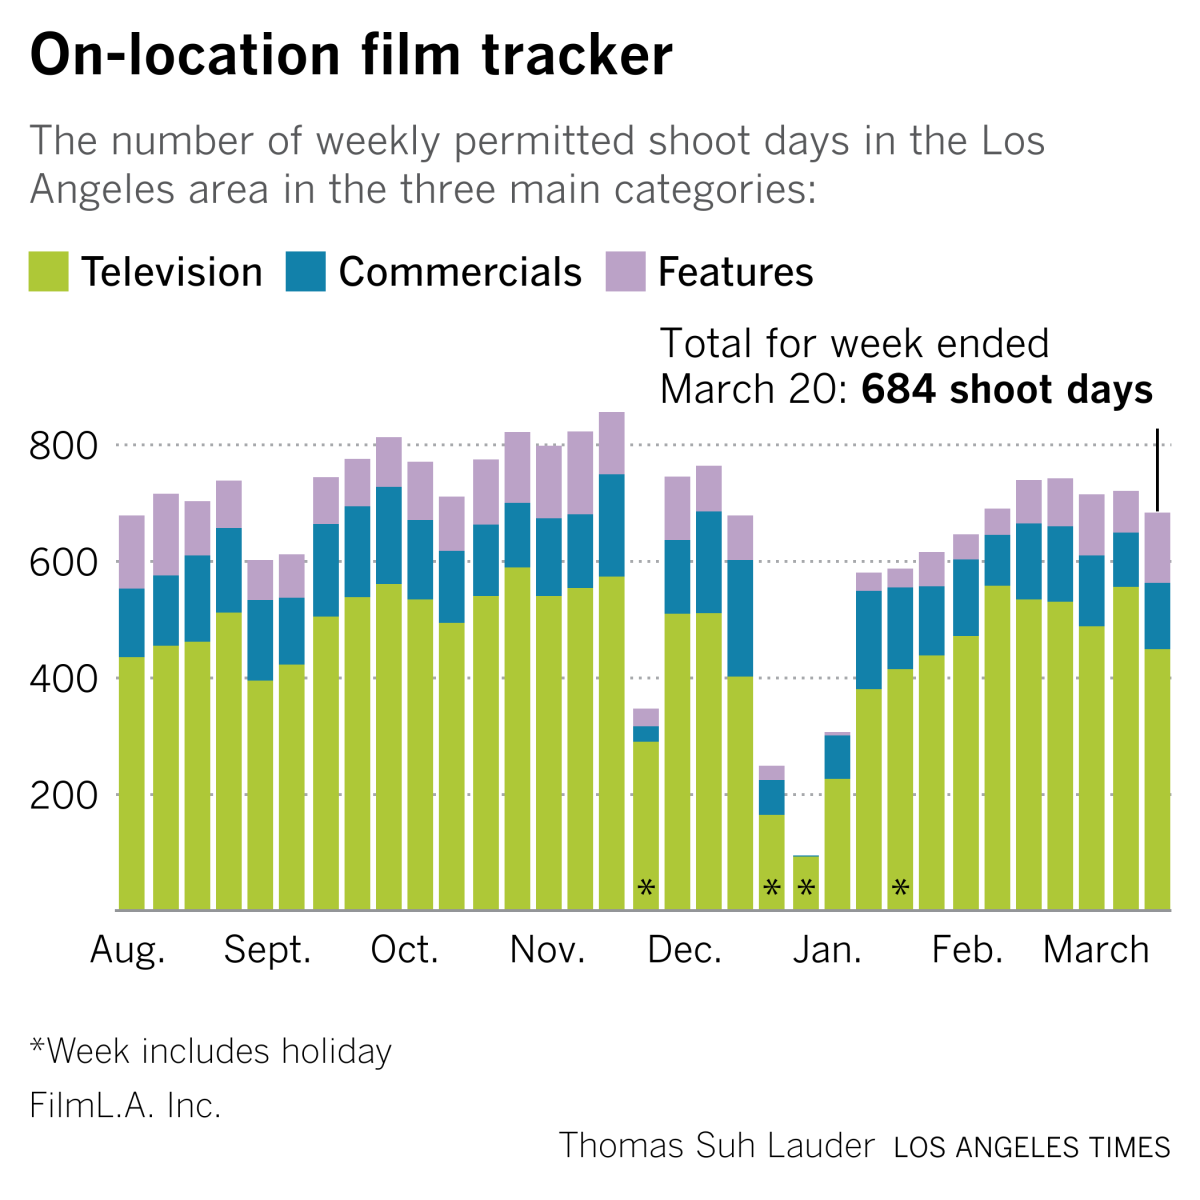 A chart showing permitted location shooting days in Los Angeles for the week ended March 20